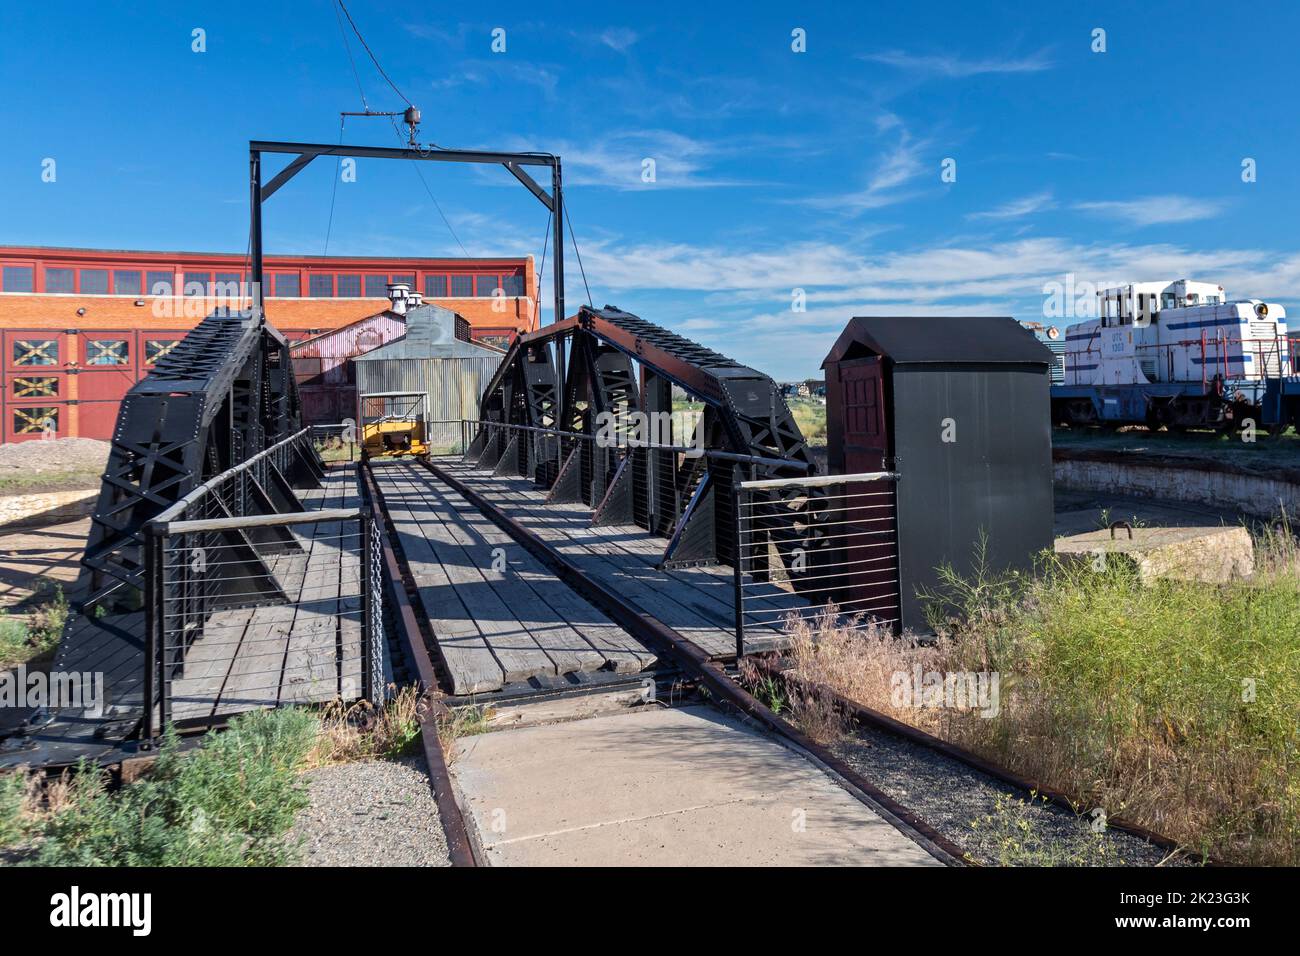 Evanston, Wyoming - The turntable at the historic roundhouse and railyards, built by the Union Pacific Railroad in 1912. The roundhouse had 28 bays fo Stock Photo